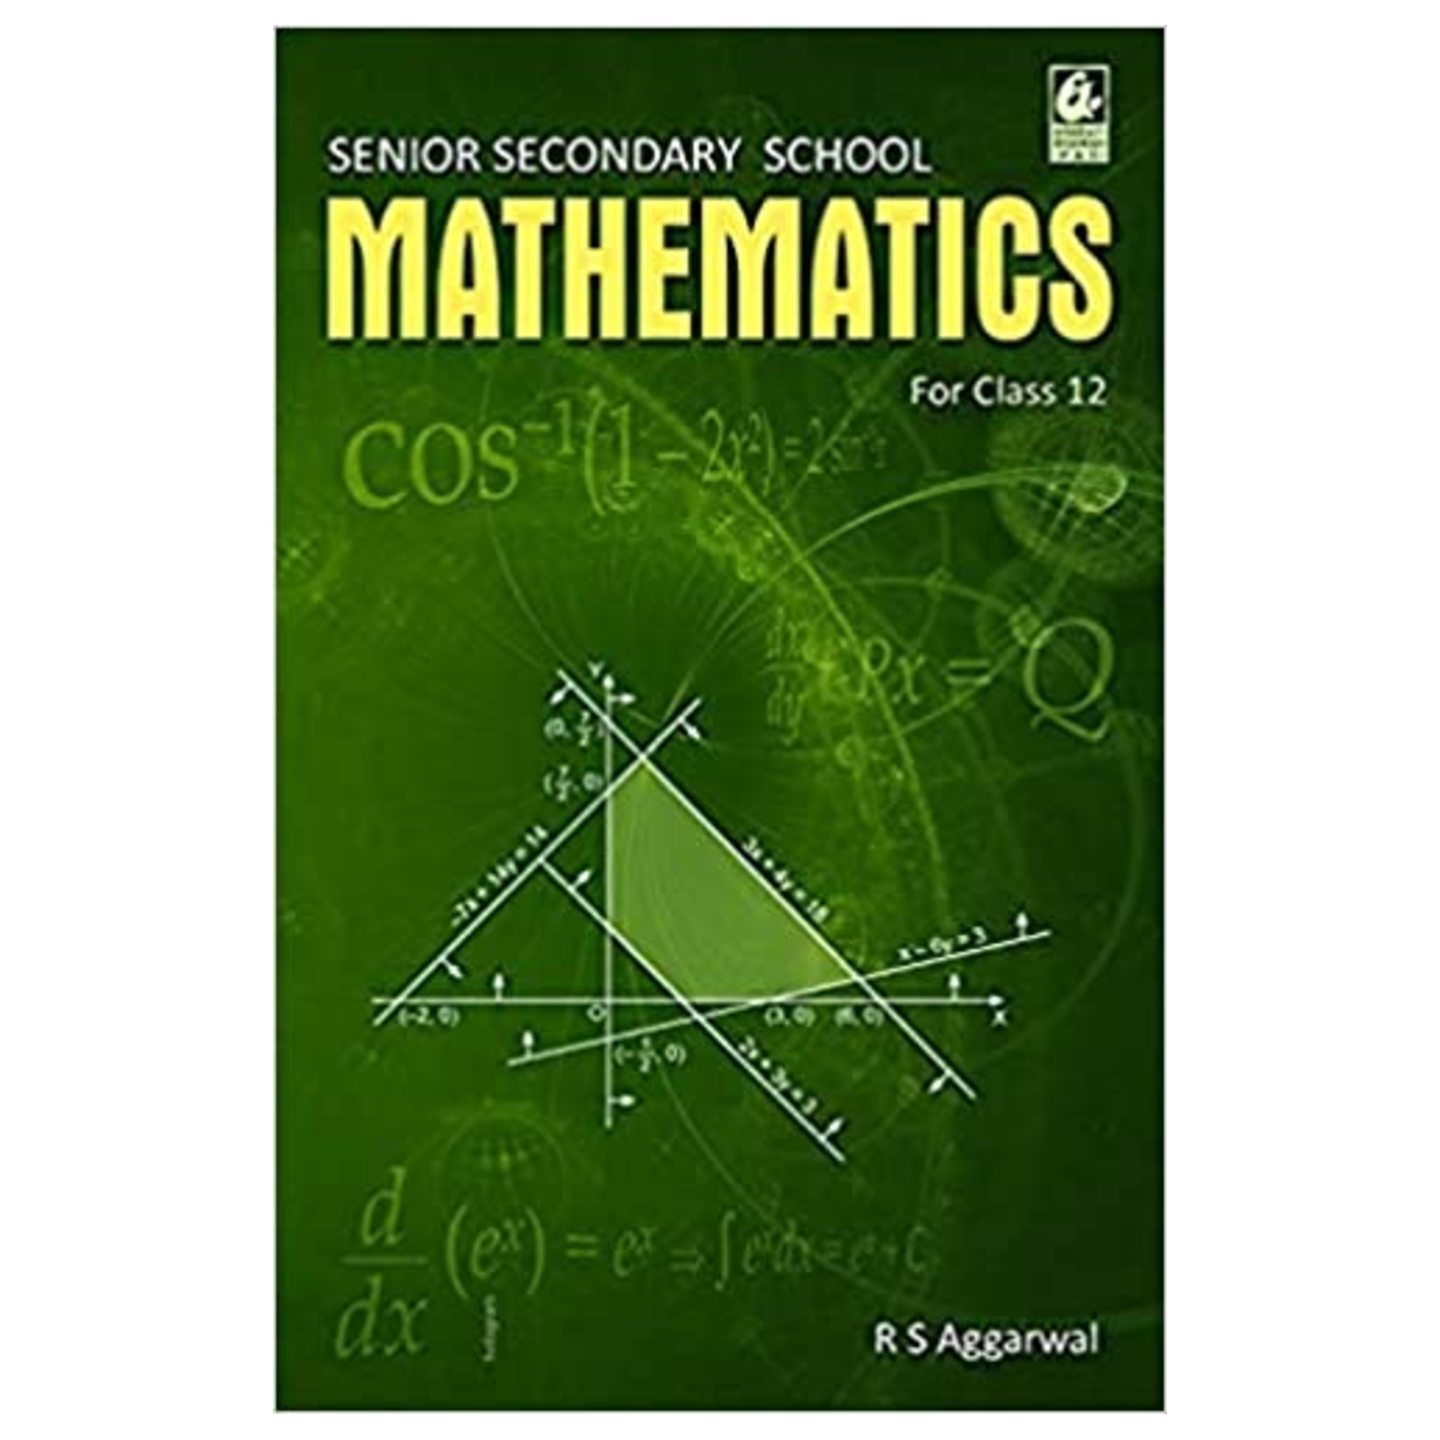 Senior Secondary Mathematics for Class 12 RS AGGARWAL